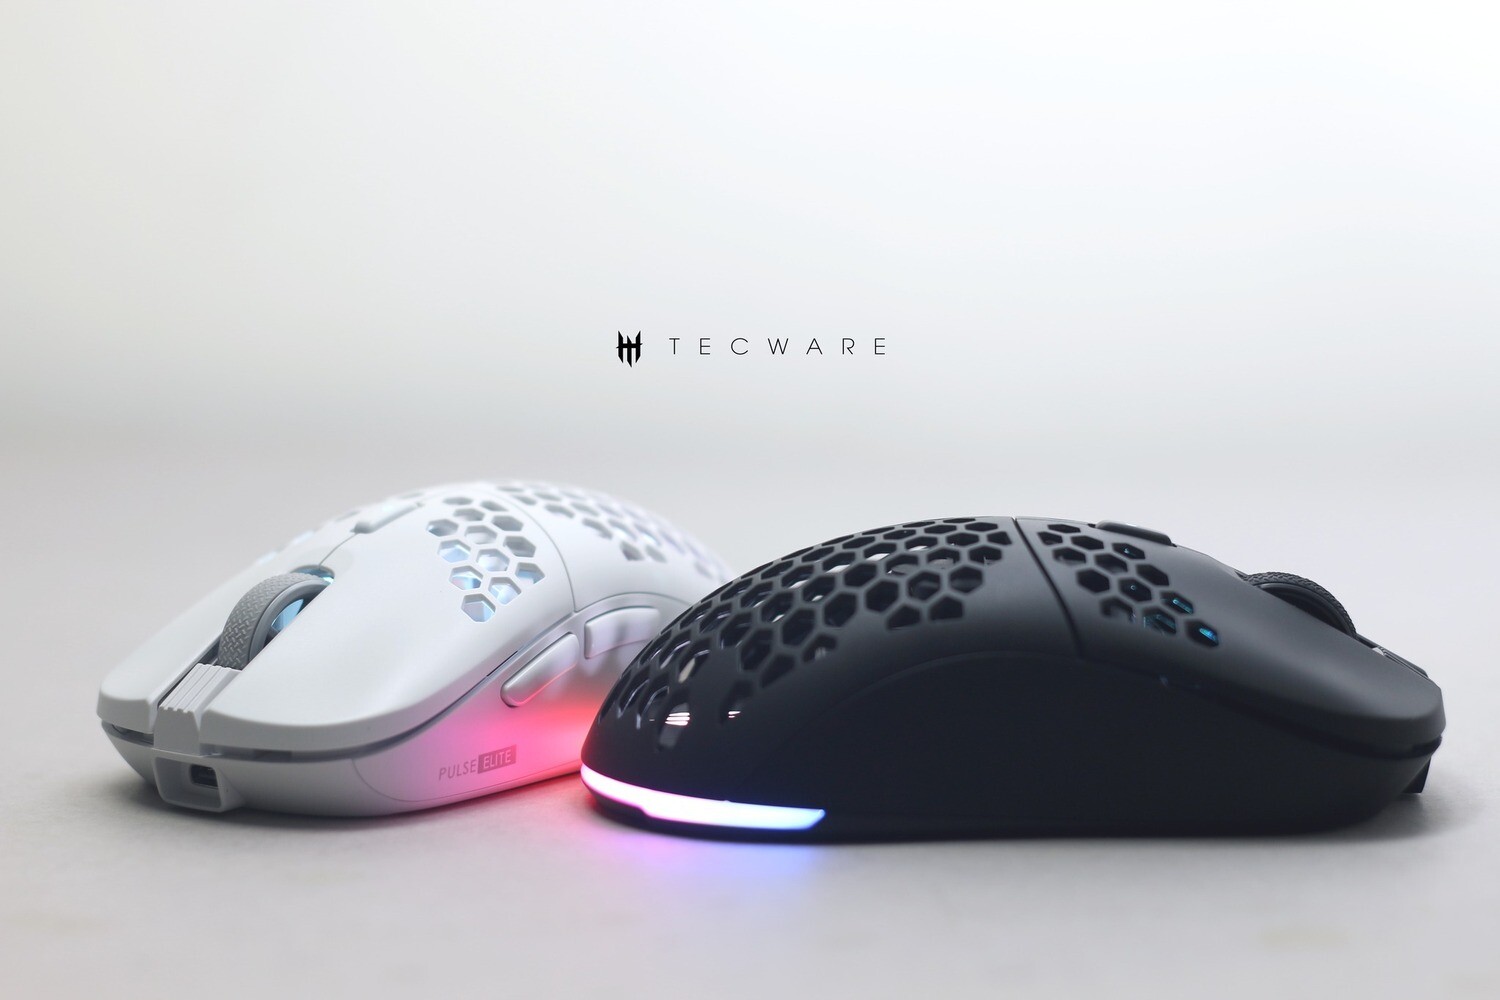 Tecware Pulse Elite Hot-swappable 2.4Ghz Wireless Ambidextrous RGB Gaming Mouse